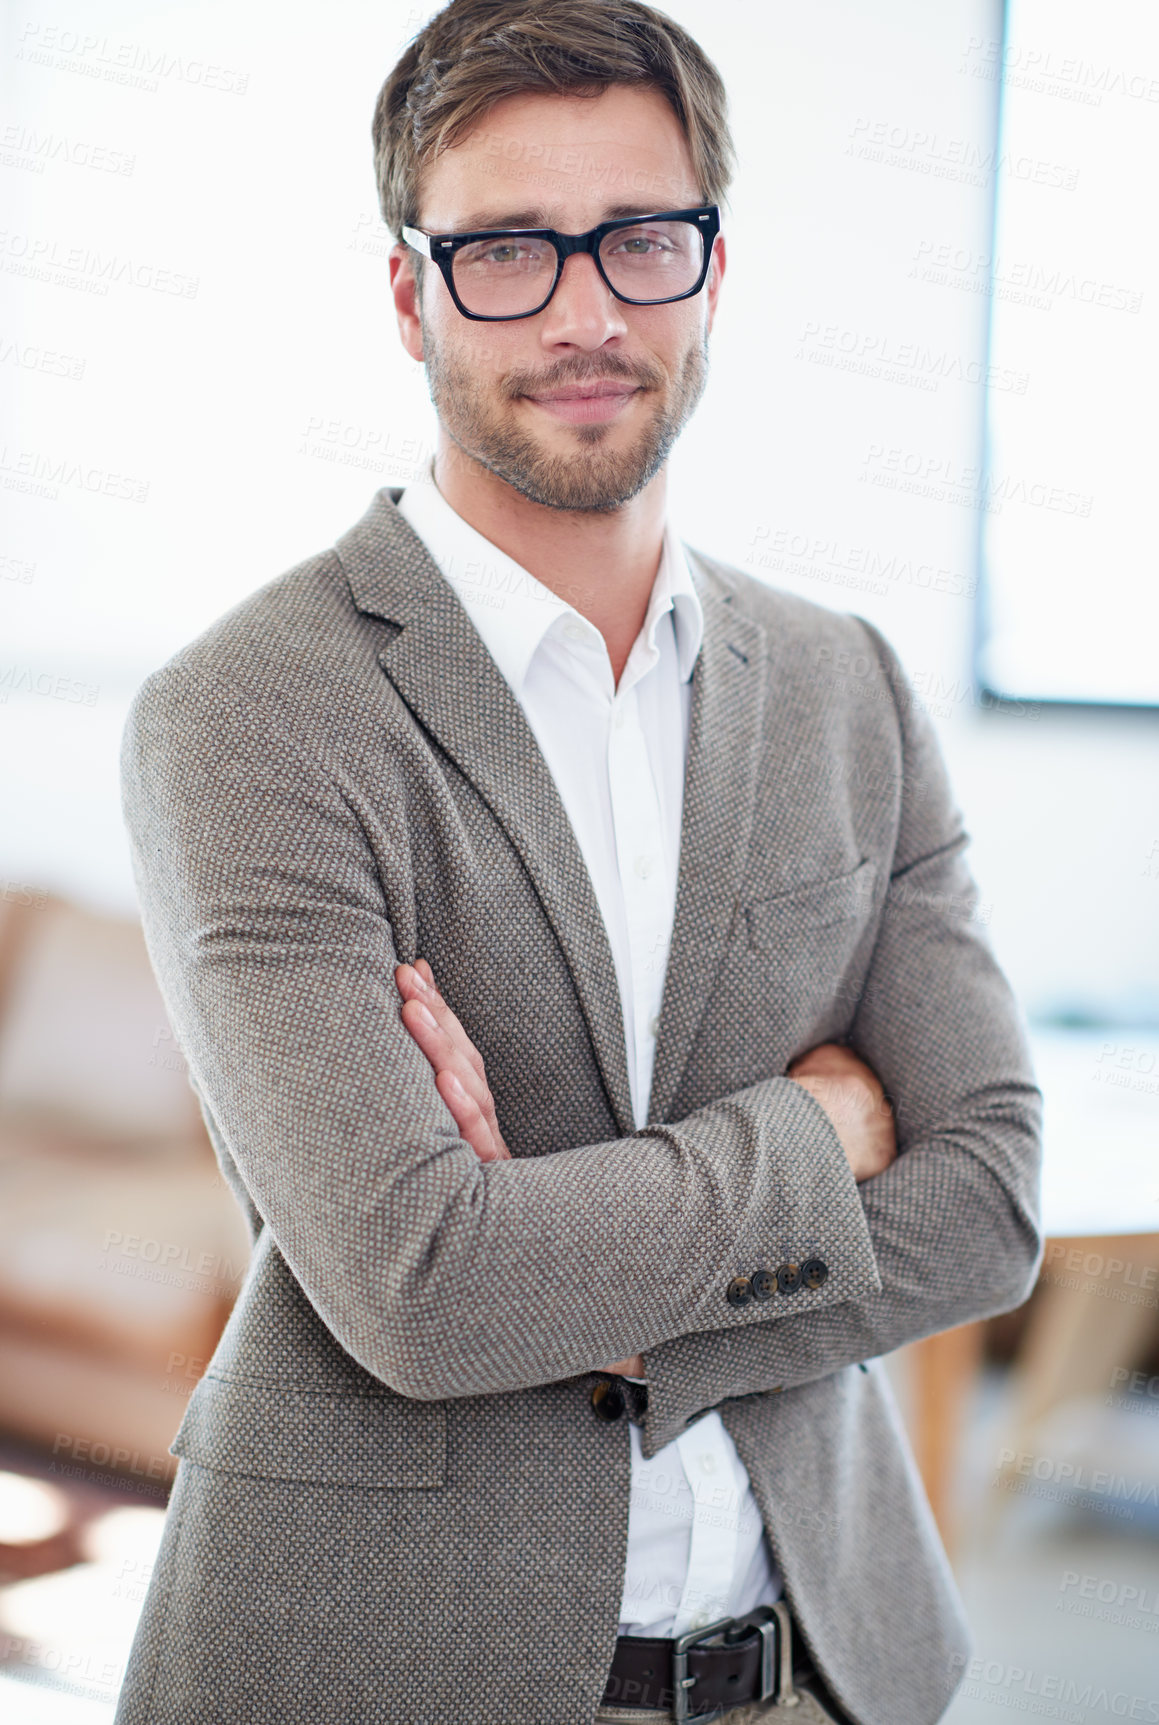 Buy stock photo Portrait of a handsome young businessman in his office